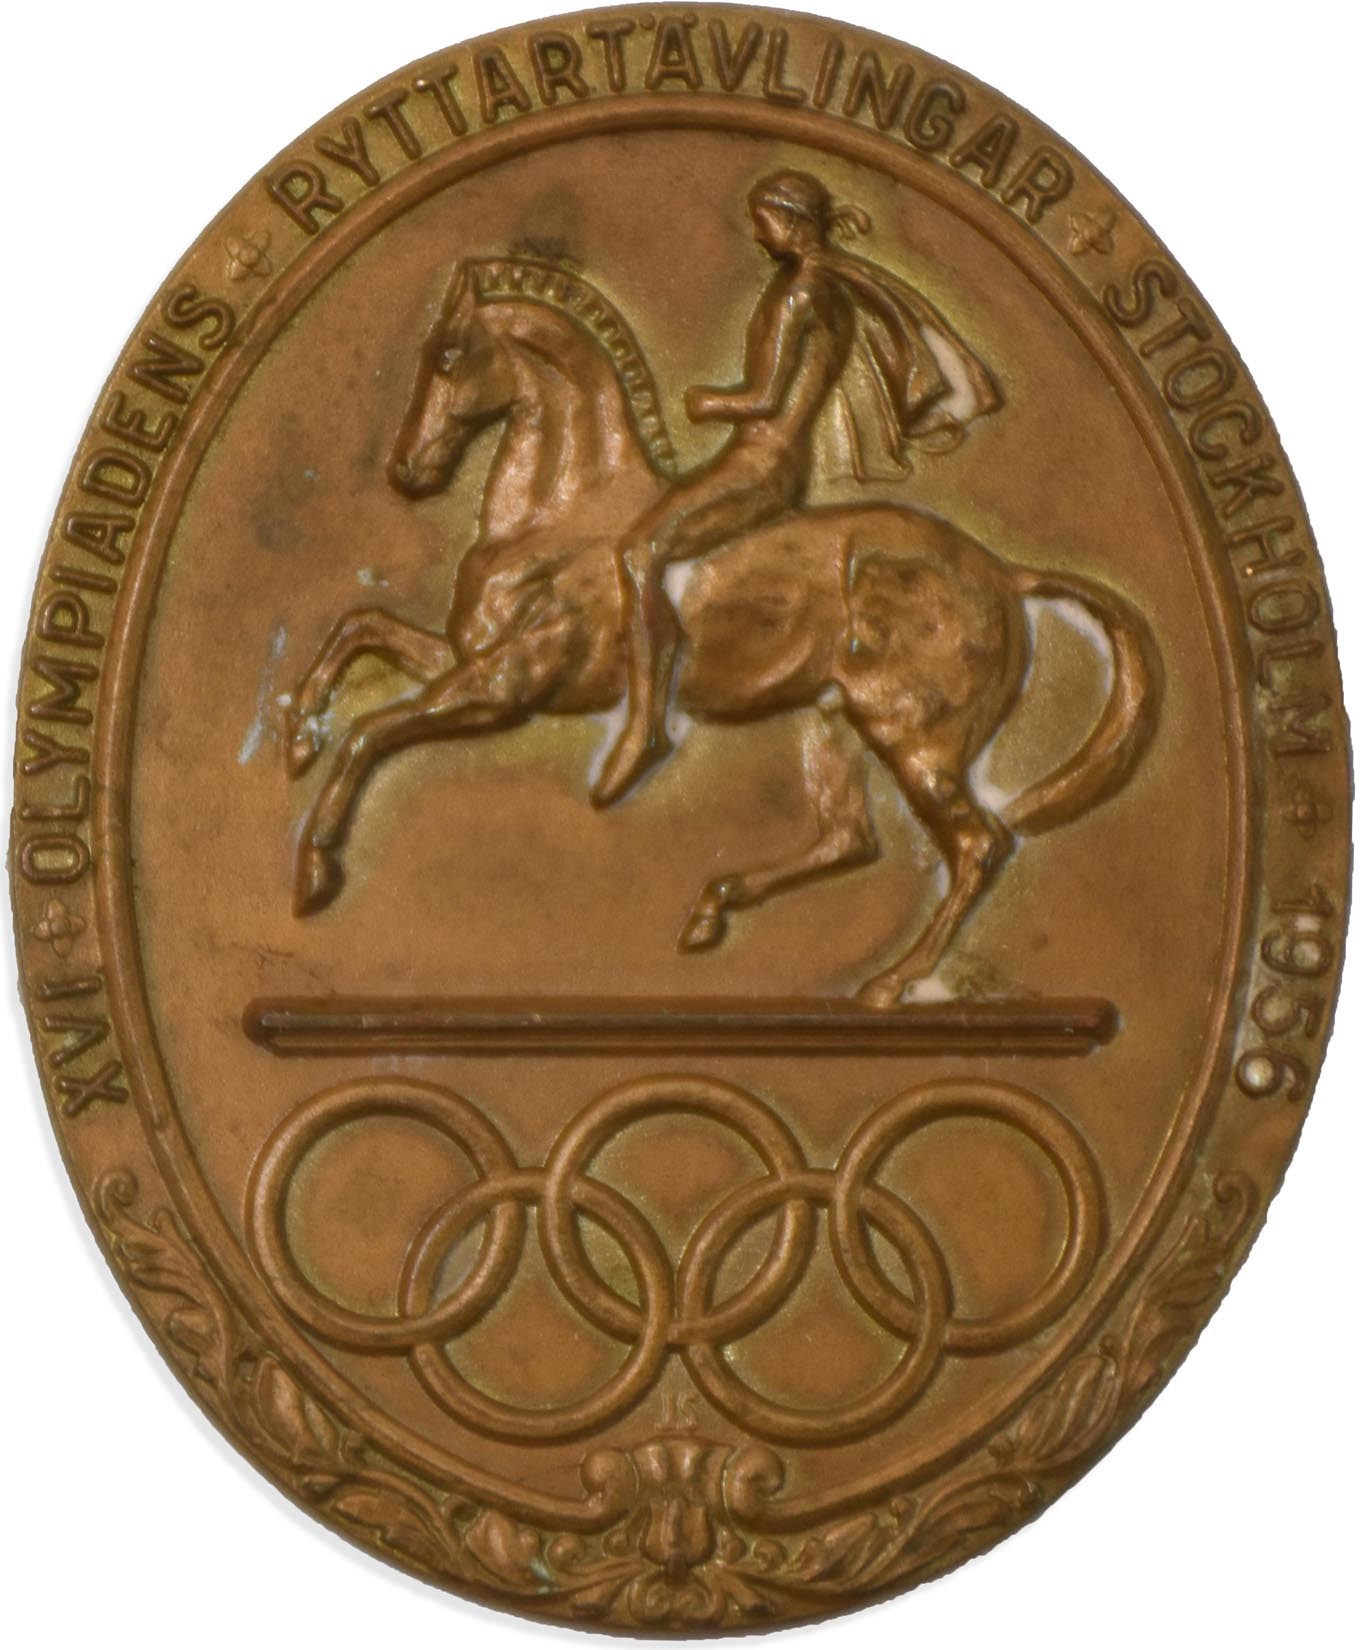 - 1956 Melbourne Summer Olympics Equestrian Participation Medal - Held in Stockholm